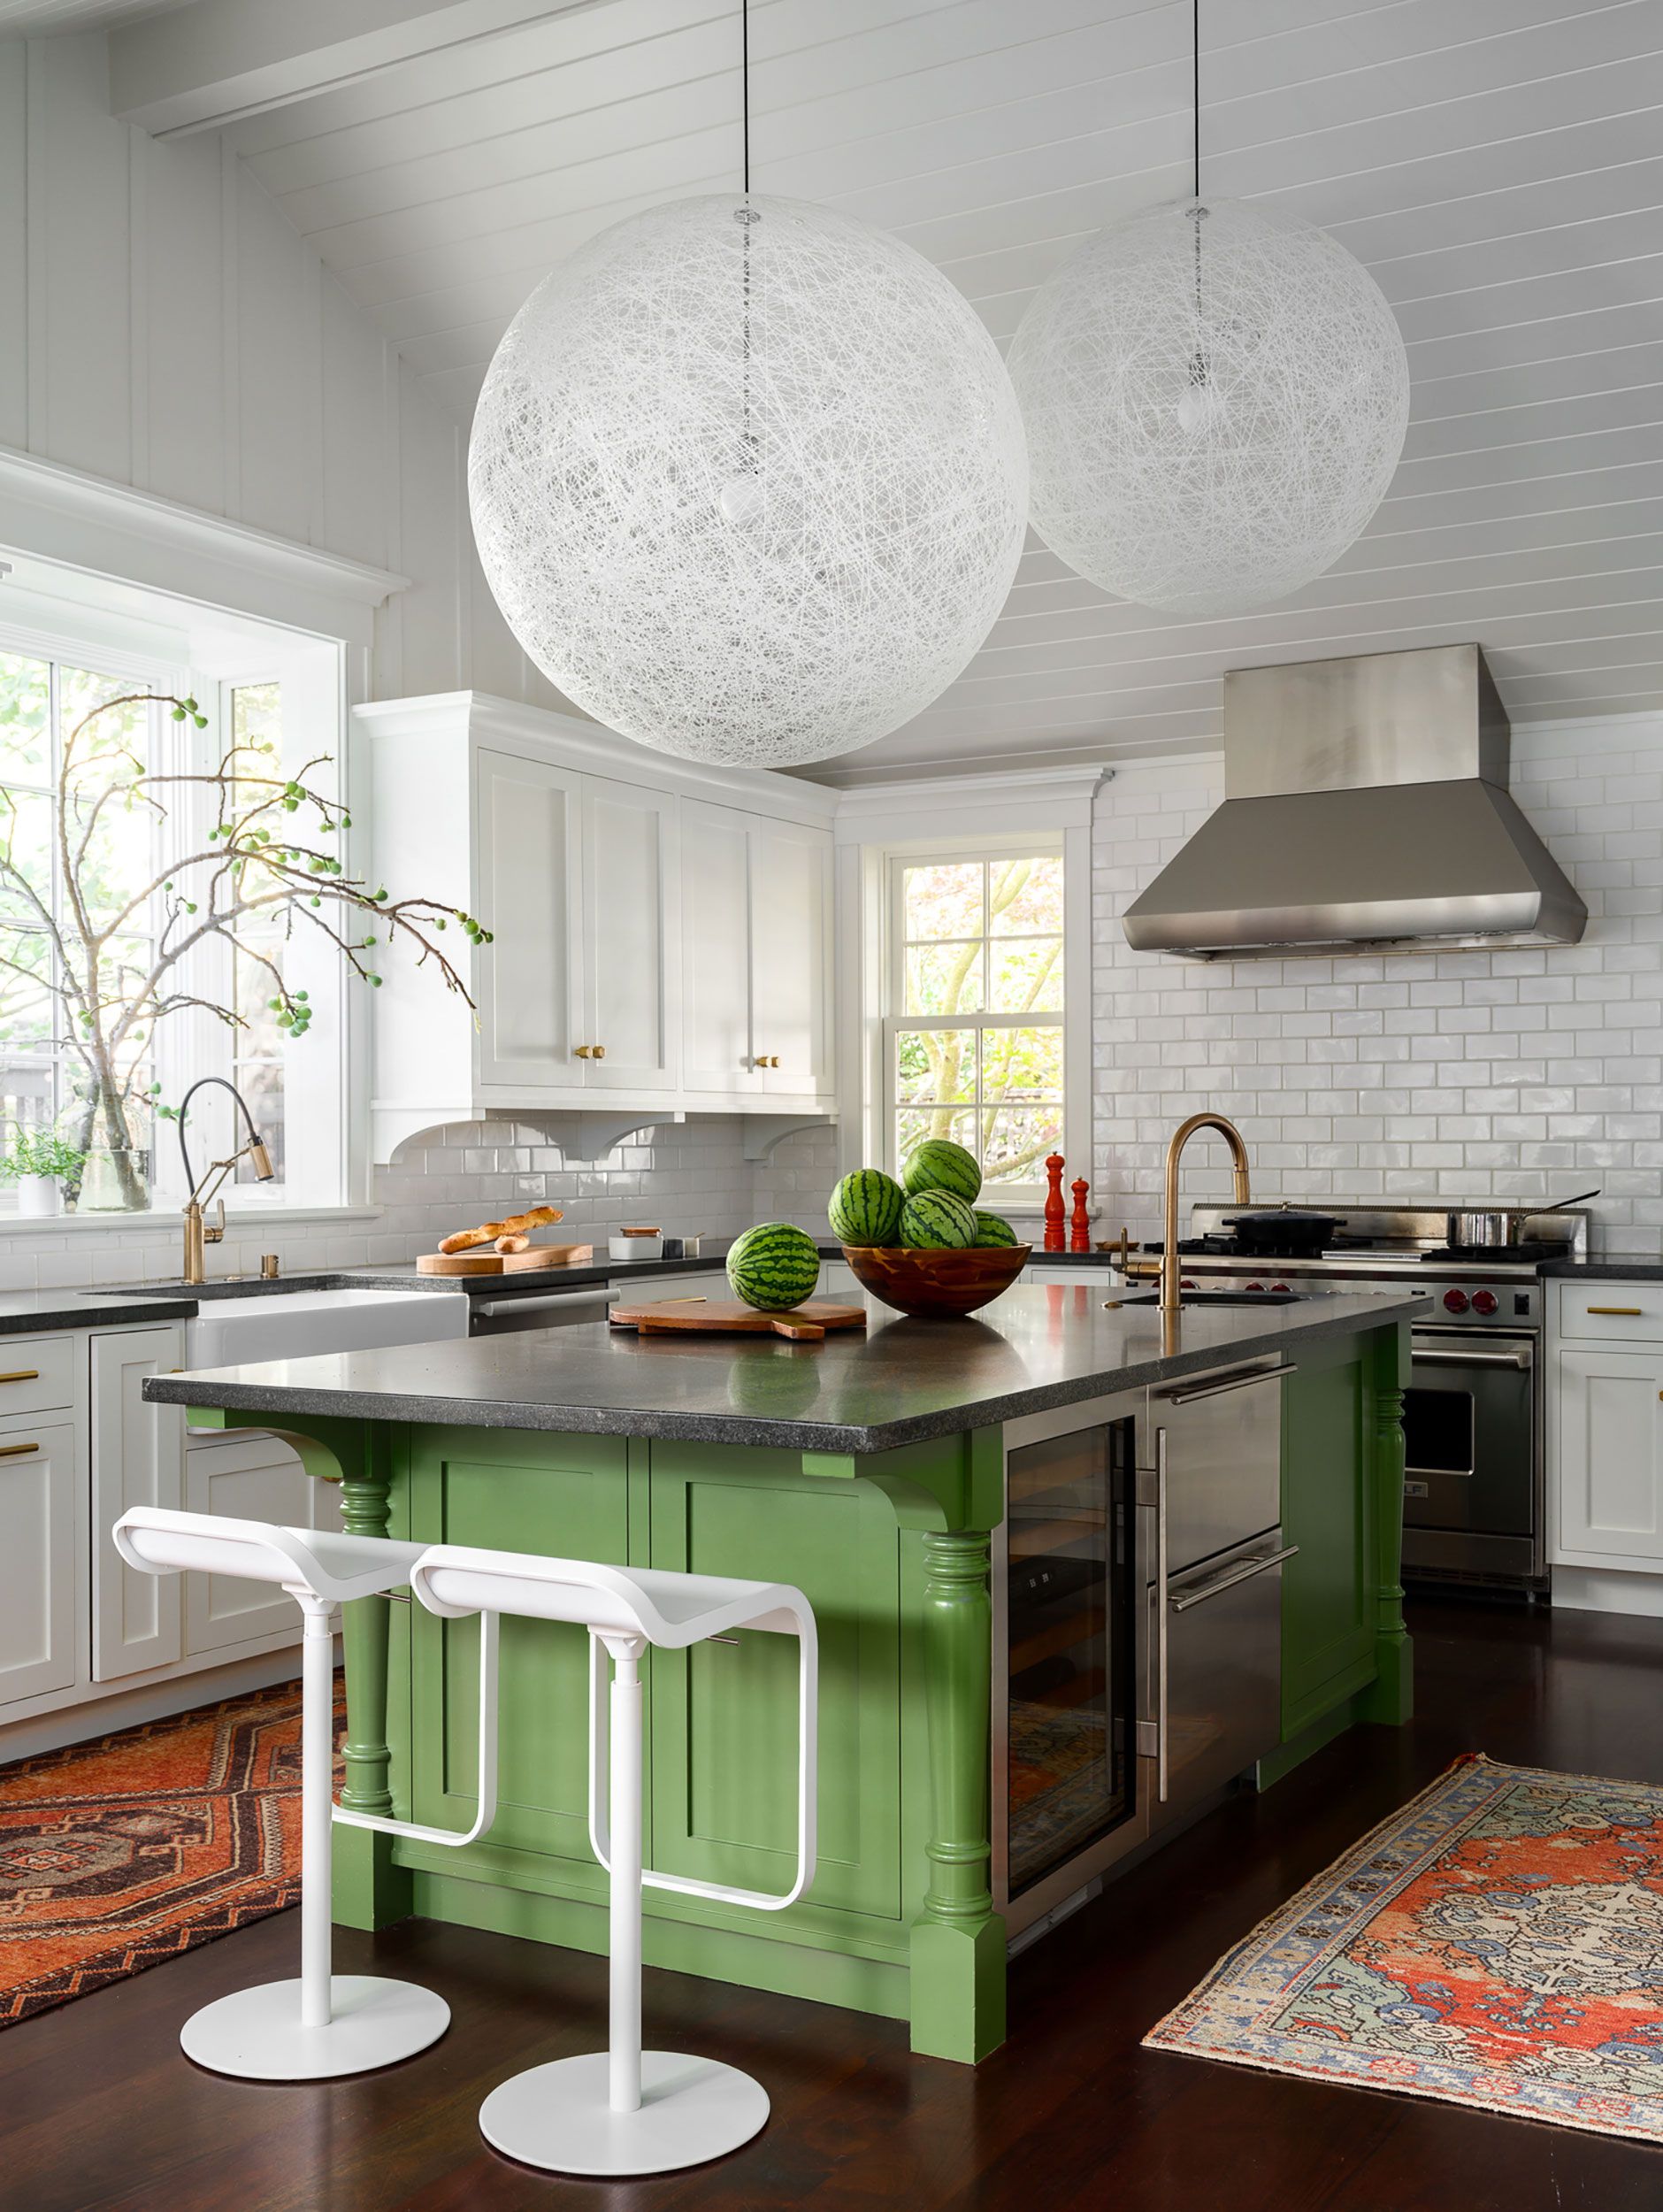 These 25 Kitchen Floor Ideas Are Tasteful AND Practical